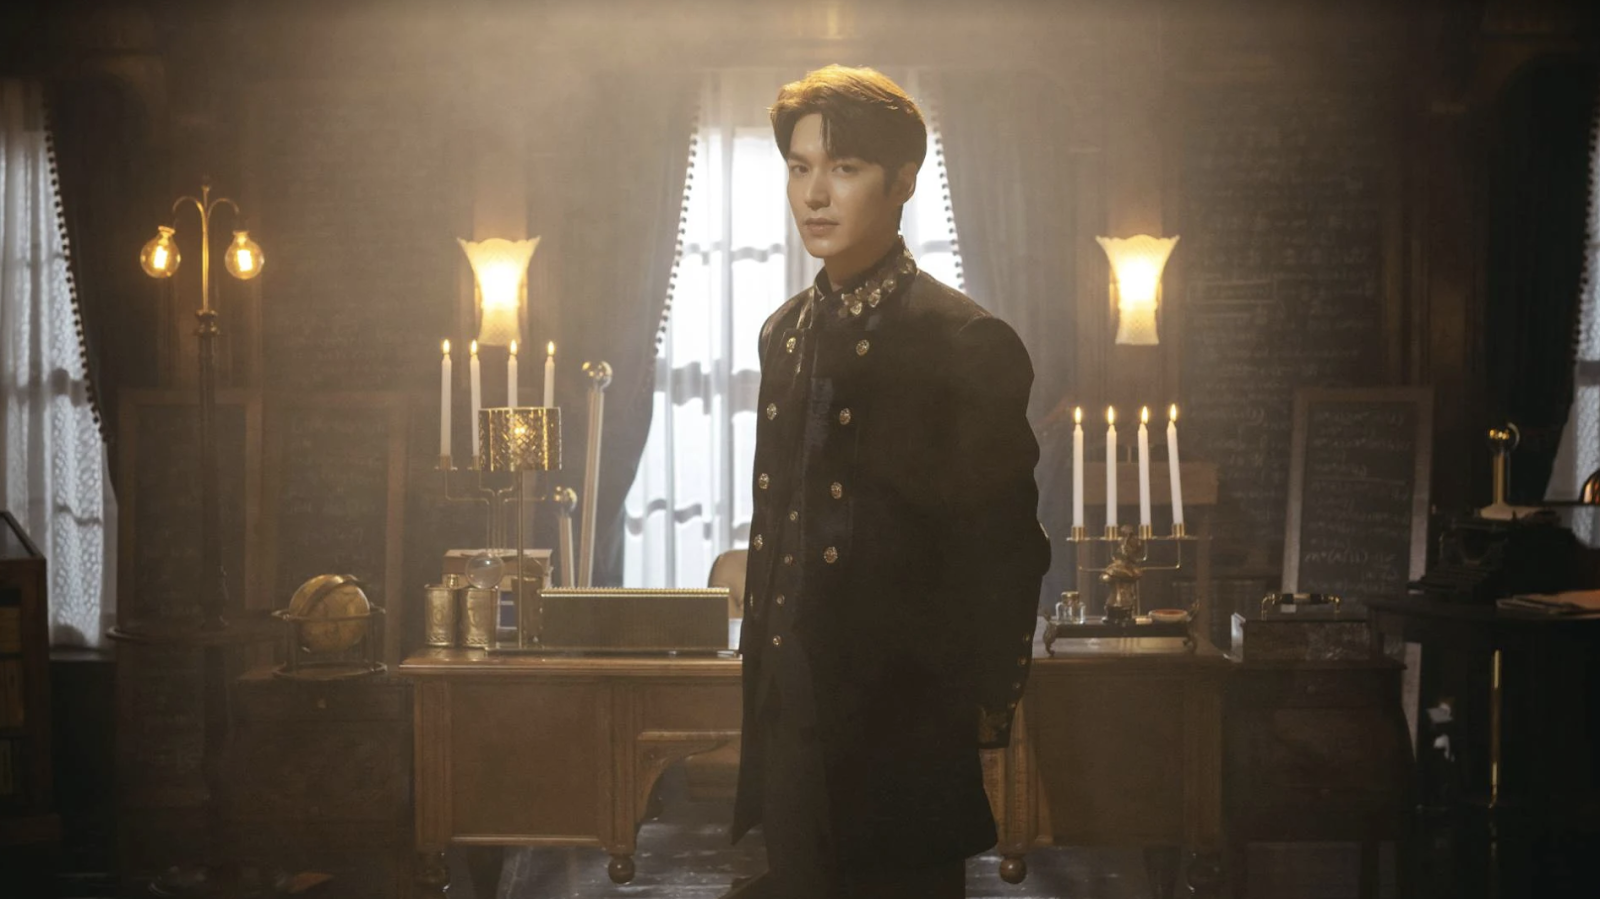 WATCH: THE KING: ETERNAL MONARCH (Deo King: Youngwonui Gunjoo) Trailer - Premieres on Netflix Starting April 17, 2020